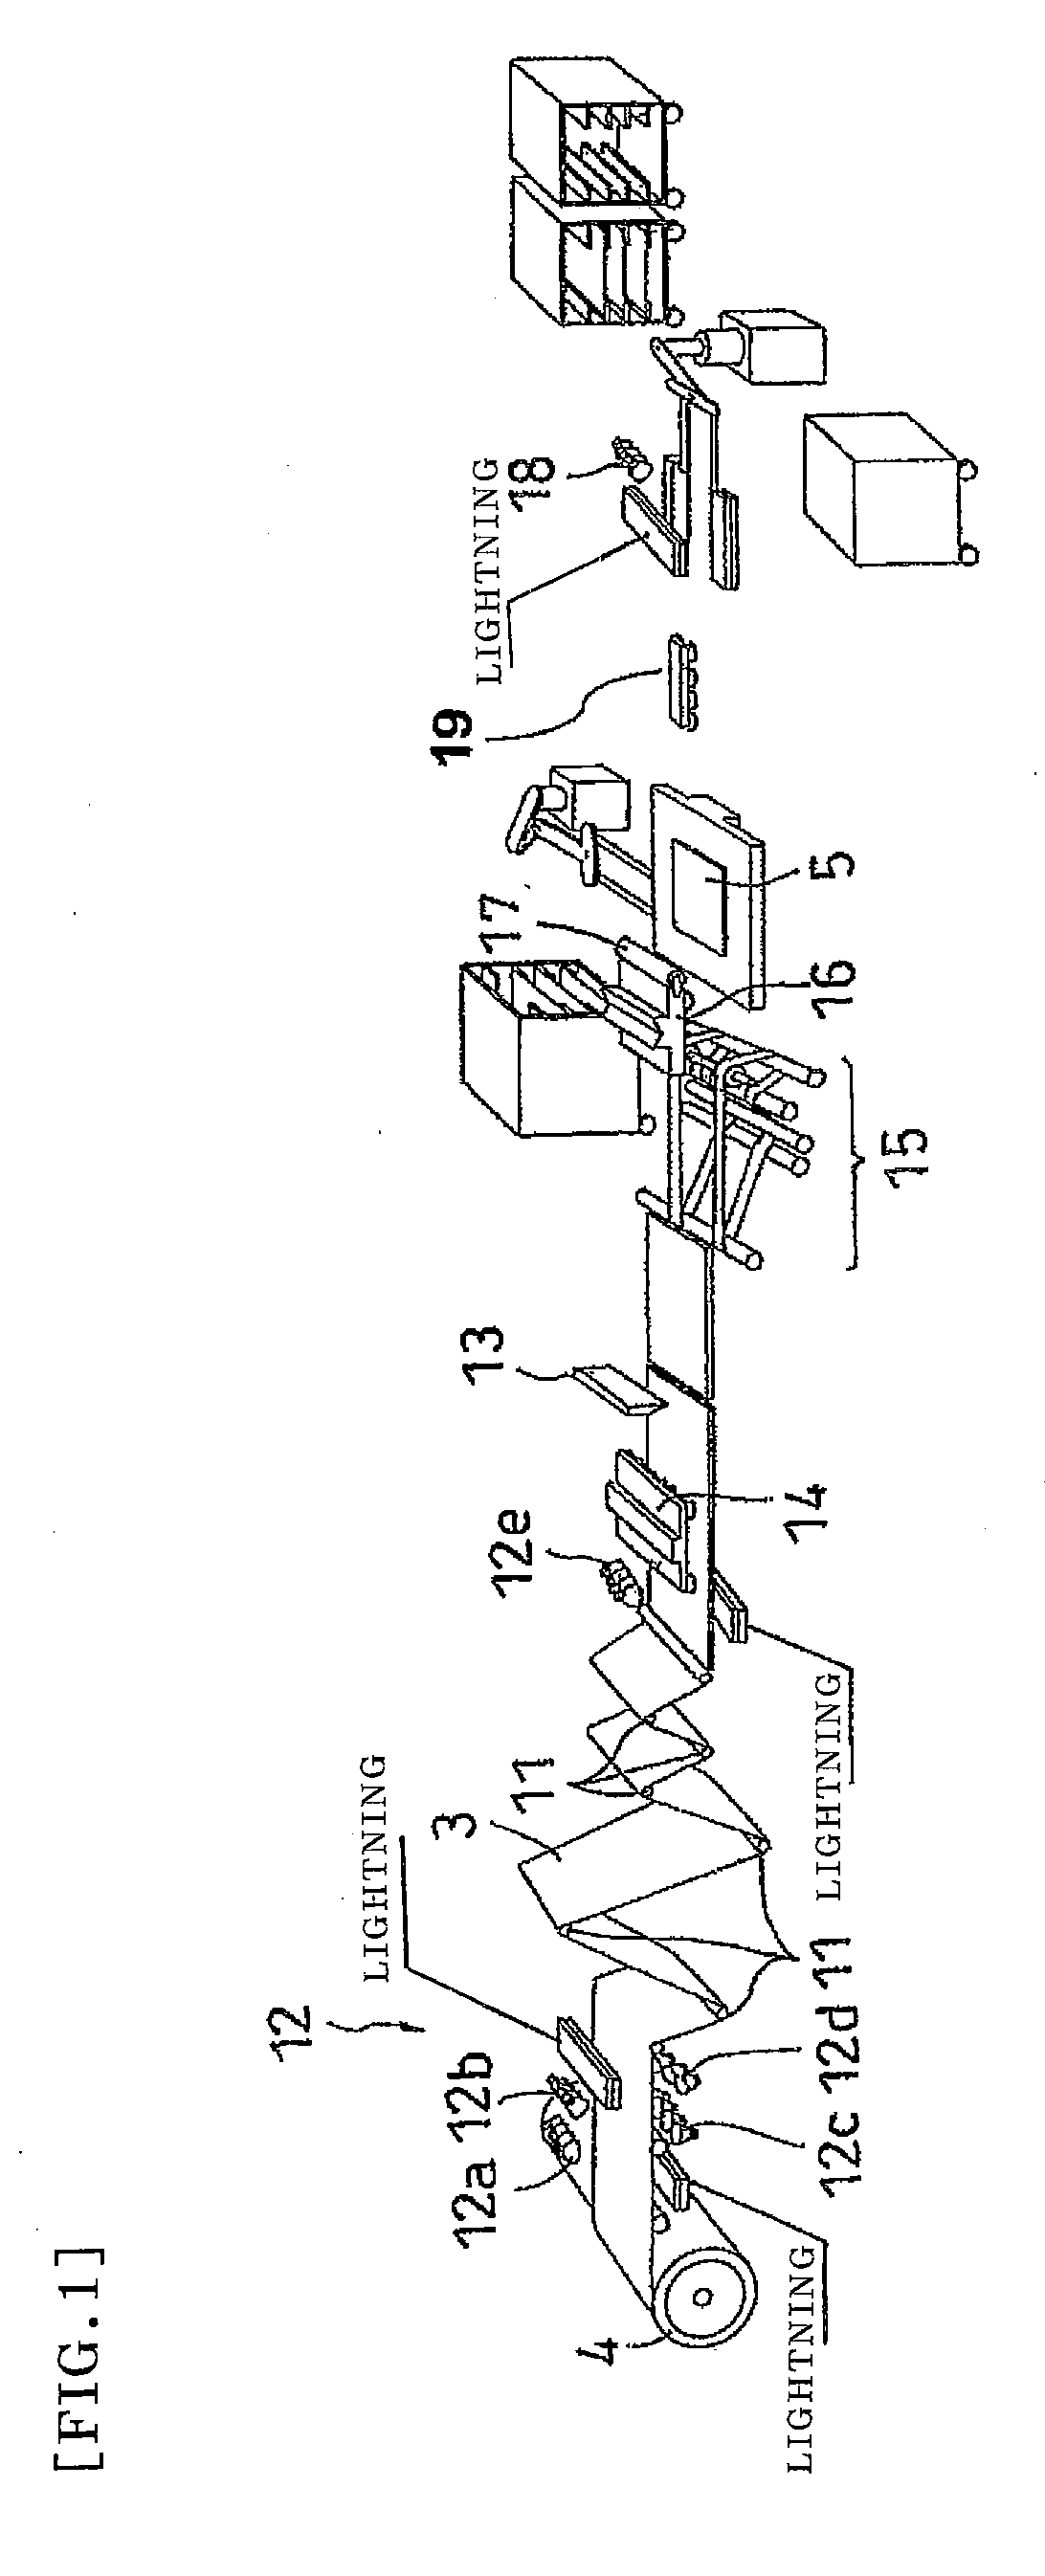 System and method for manufacturing optical display